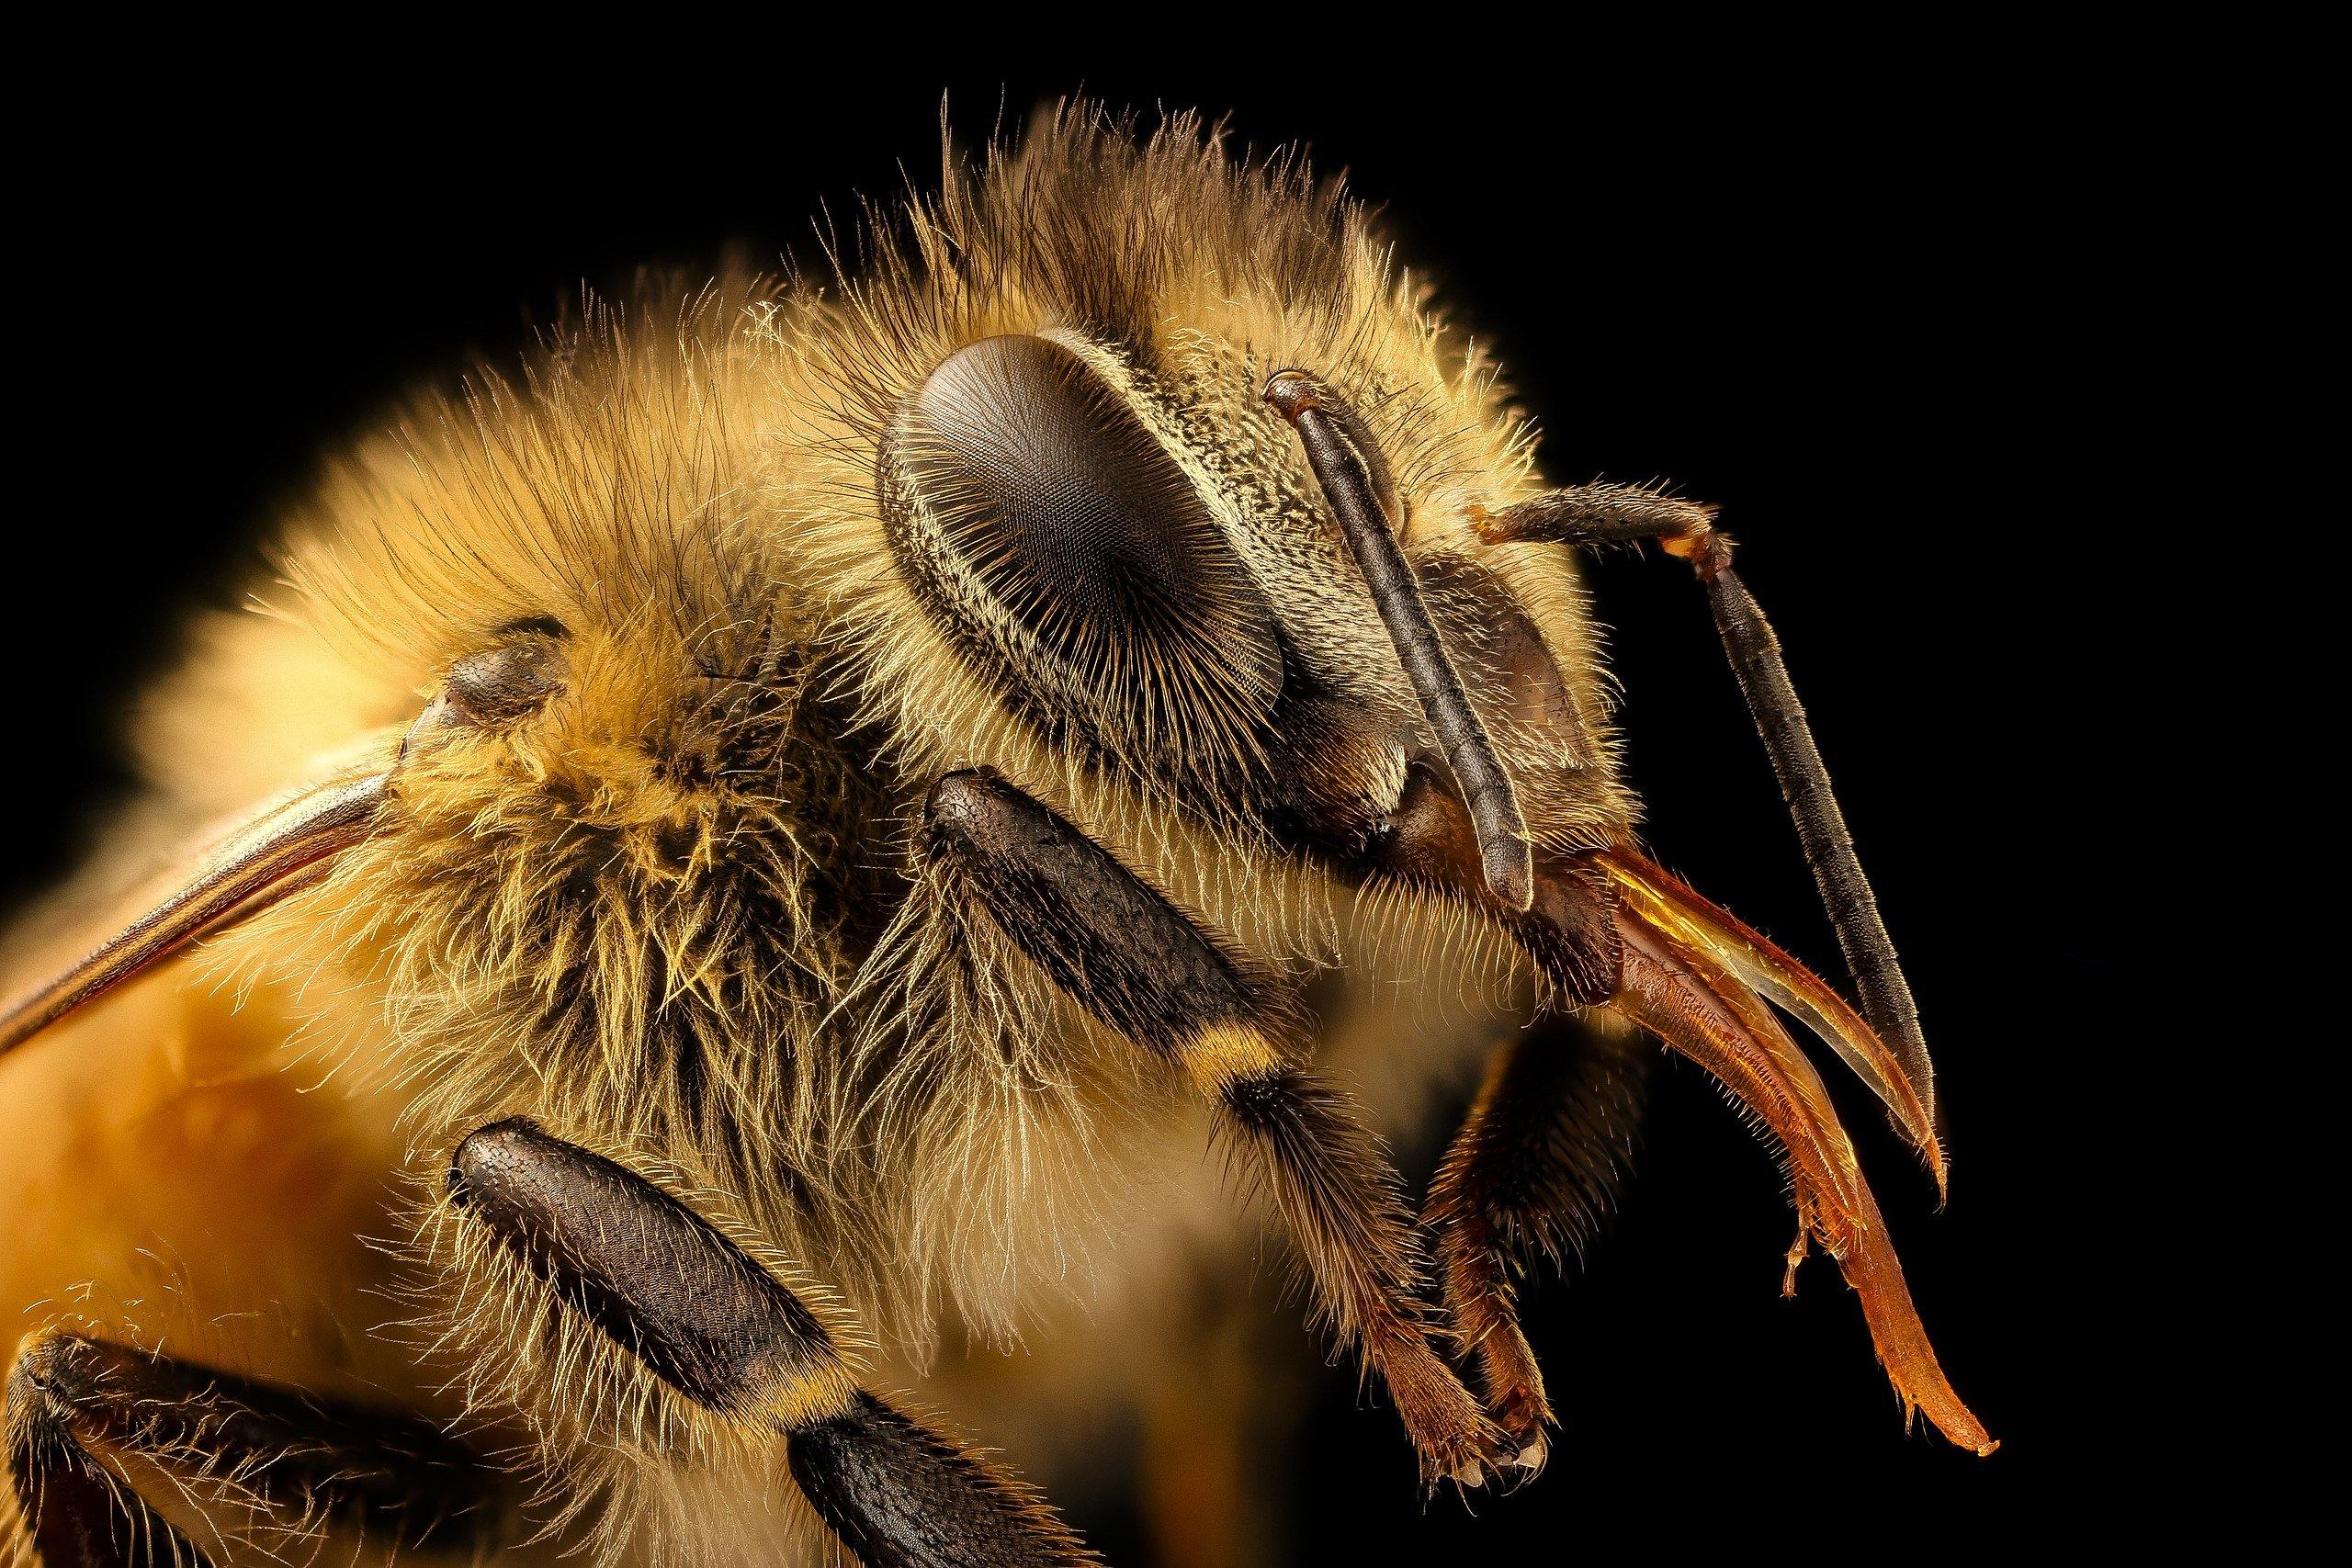 The Honey Bee: Our Friend in Danger